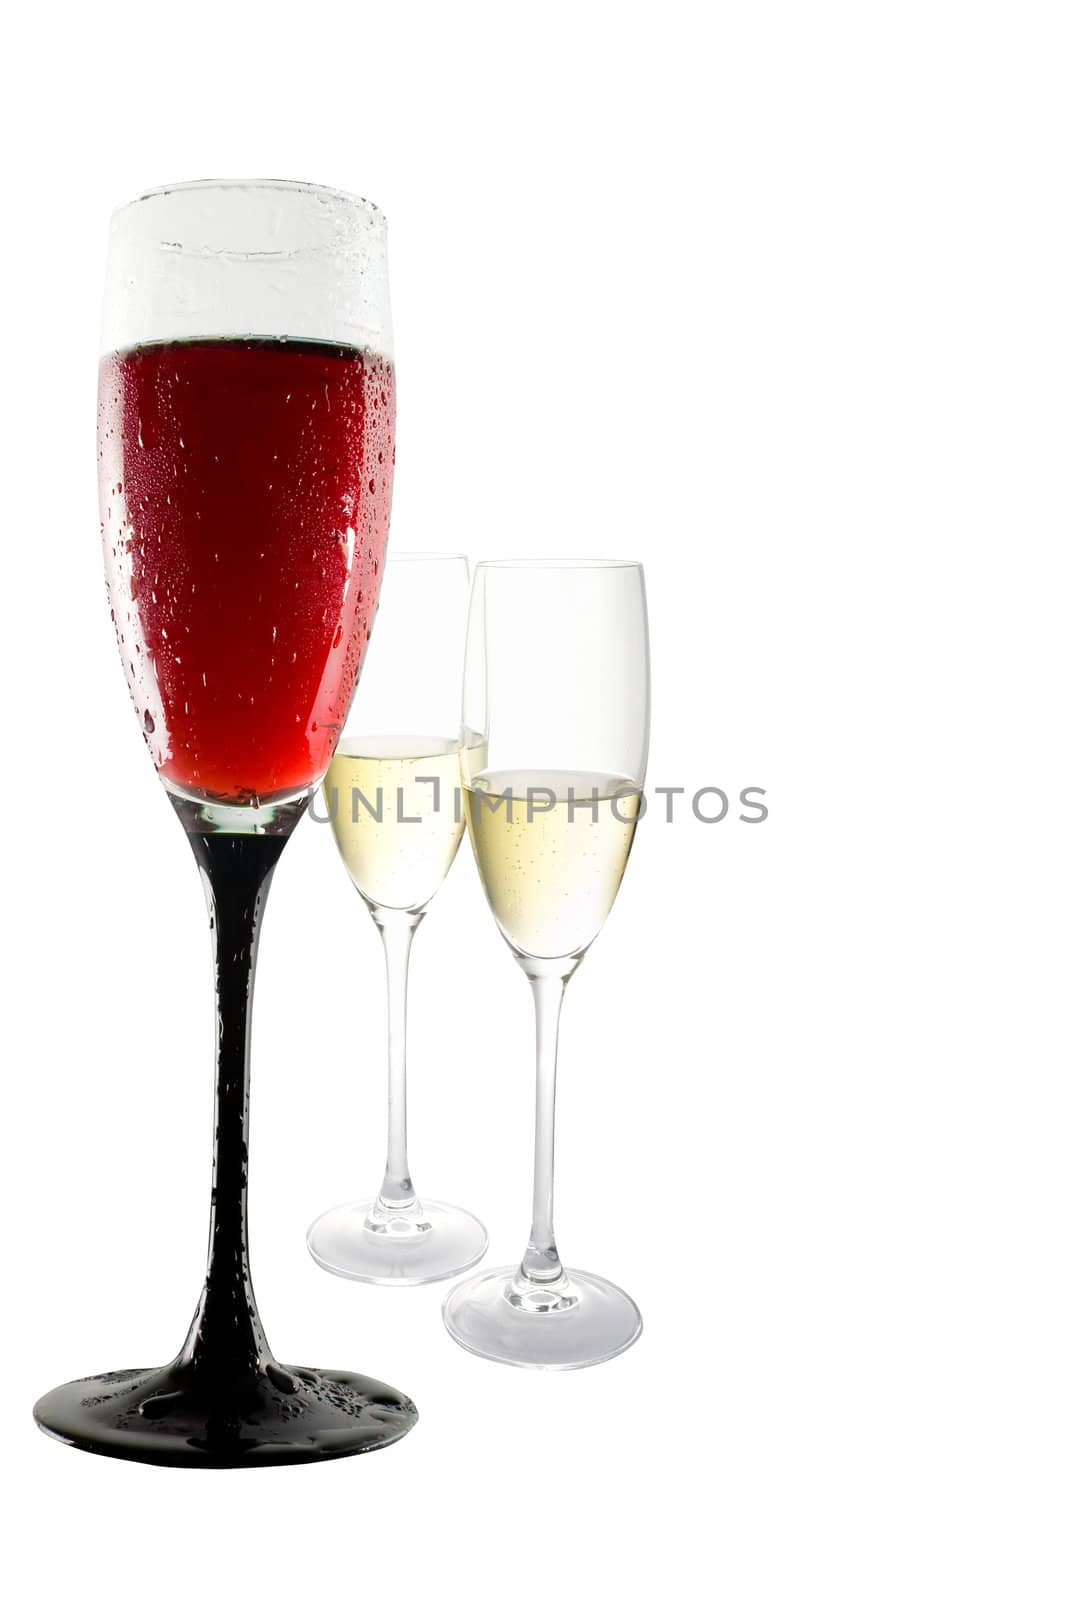 Red wine being poured into a wine glass by rufous